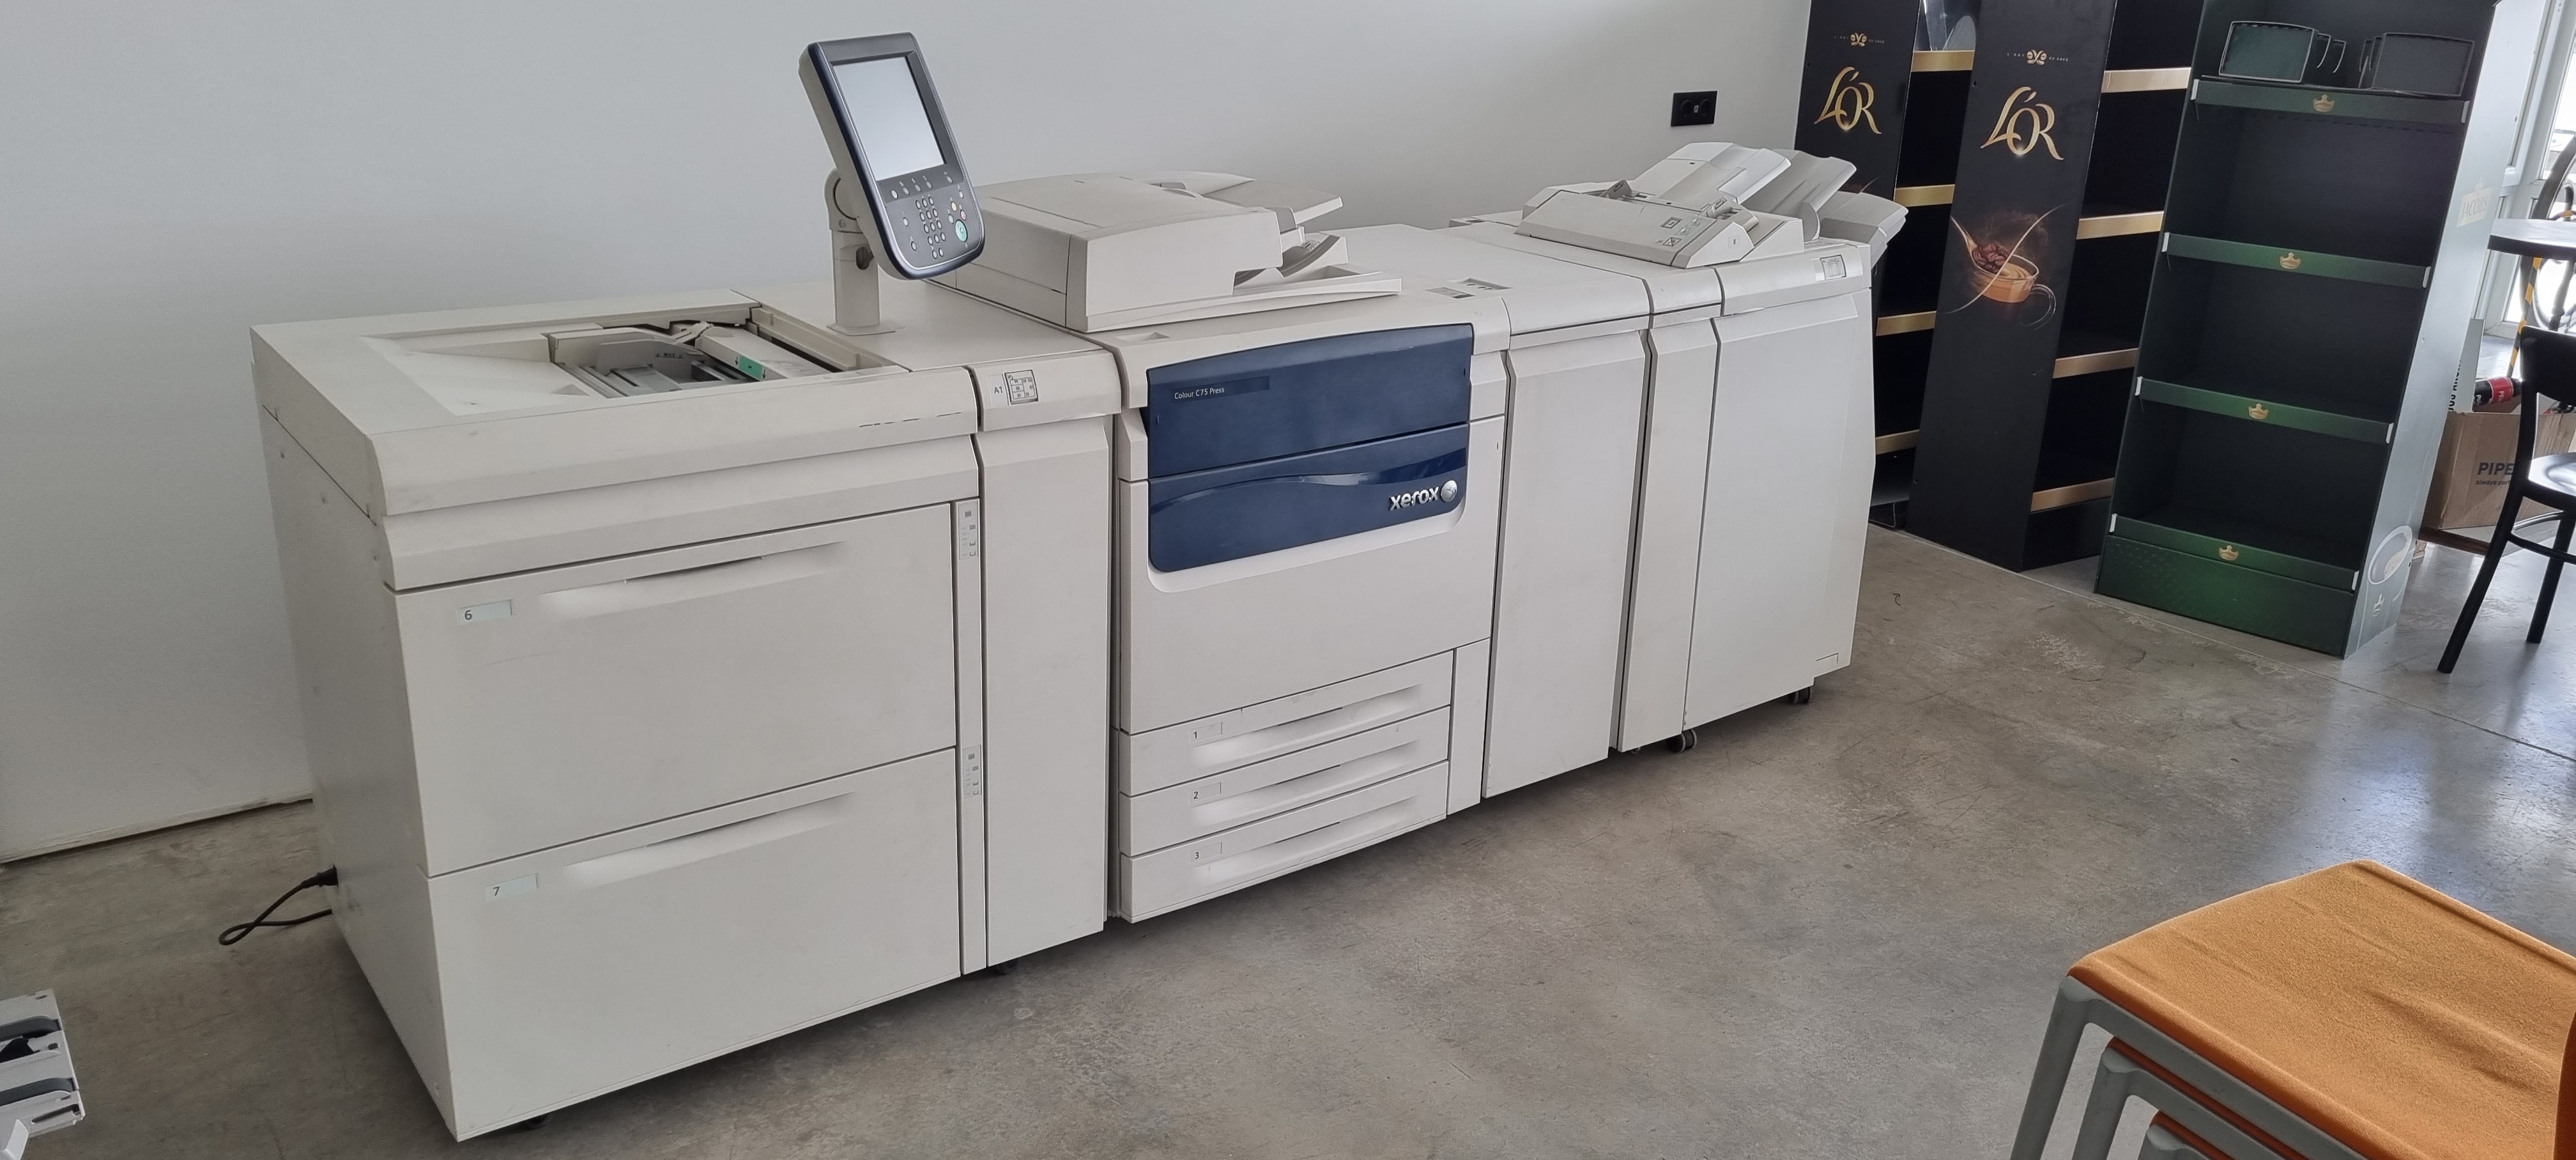 Xerox Color-C75-Press Digital Press Used Machinery for sale